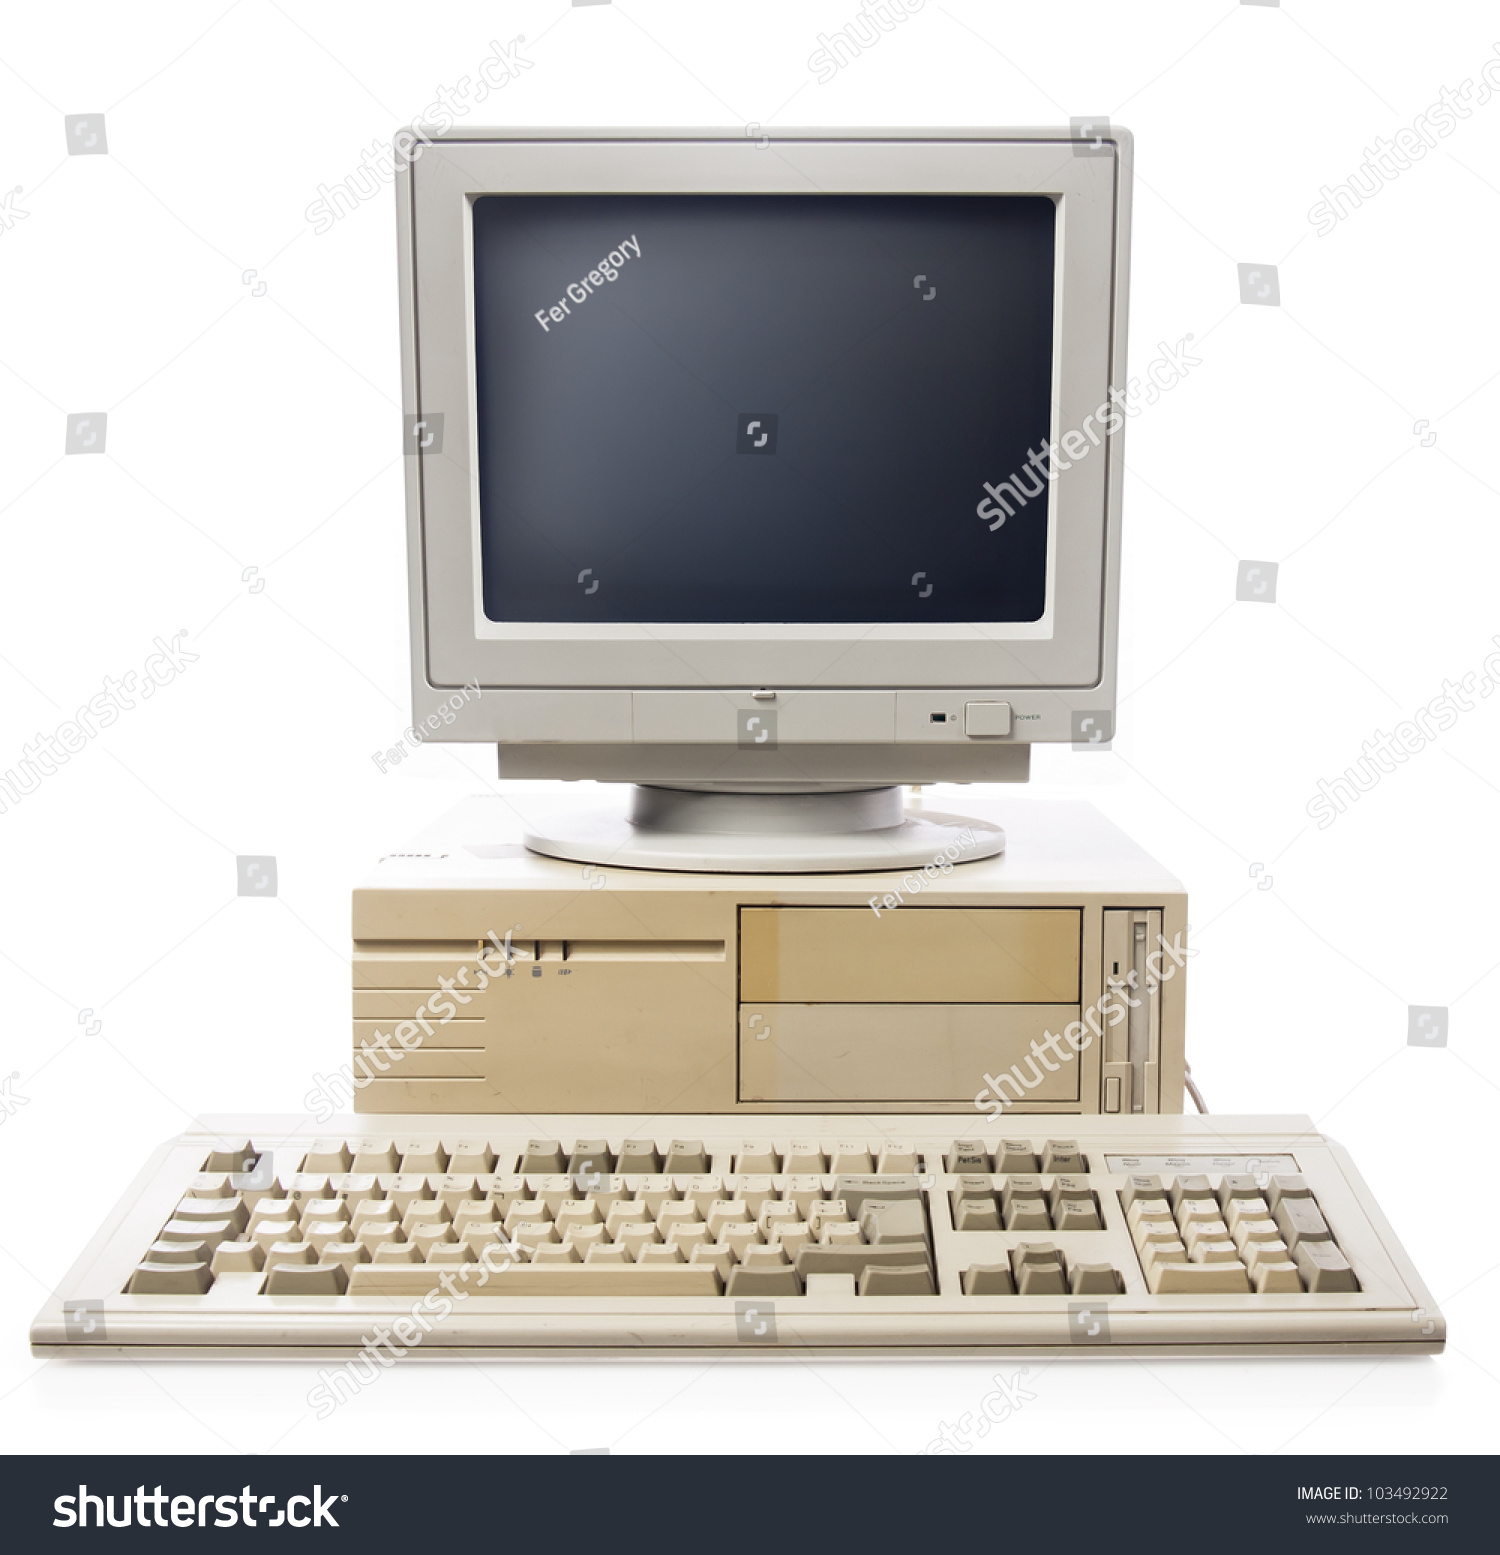 Vintage Computer Isolated On White Stock Photo 103492922 - Shutterstock